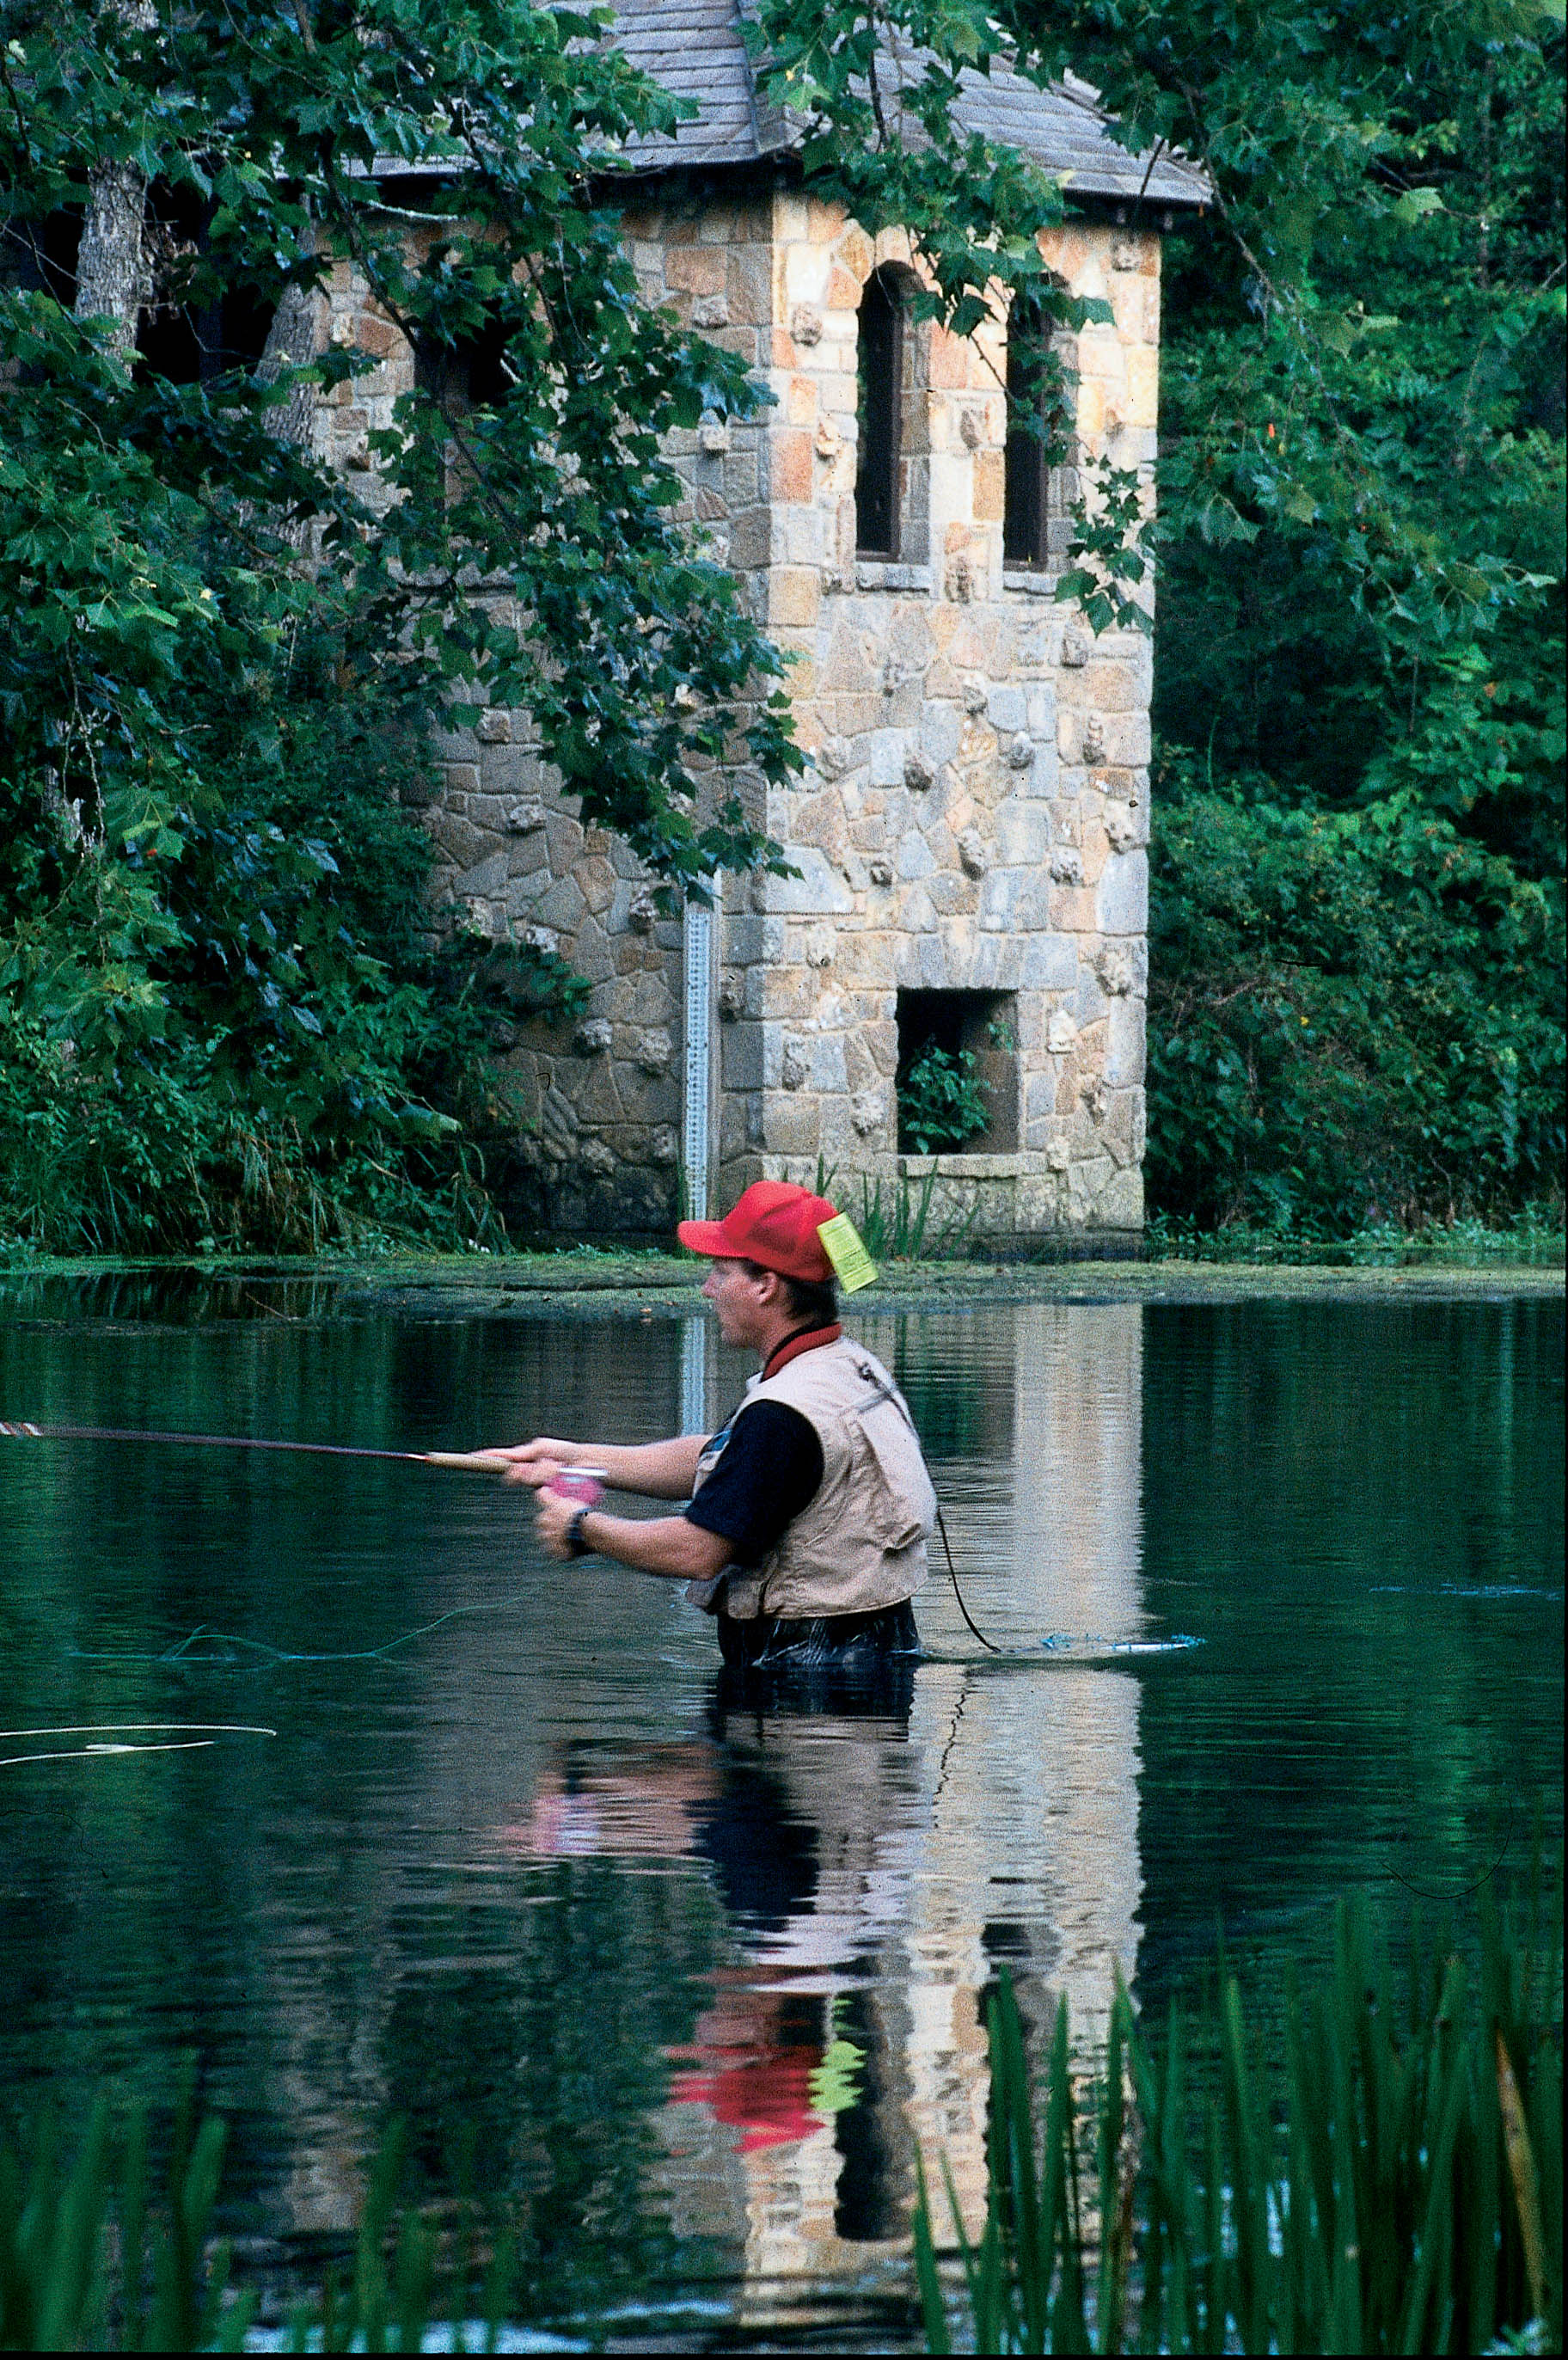 A man wading in the water fishing in front of one of the historic structures at Bennett Spring State Park